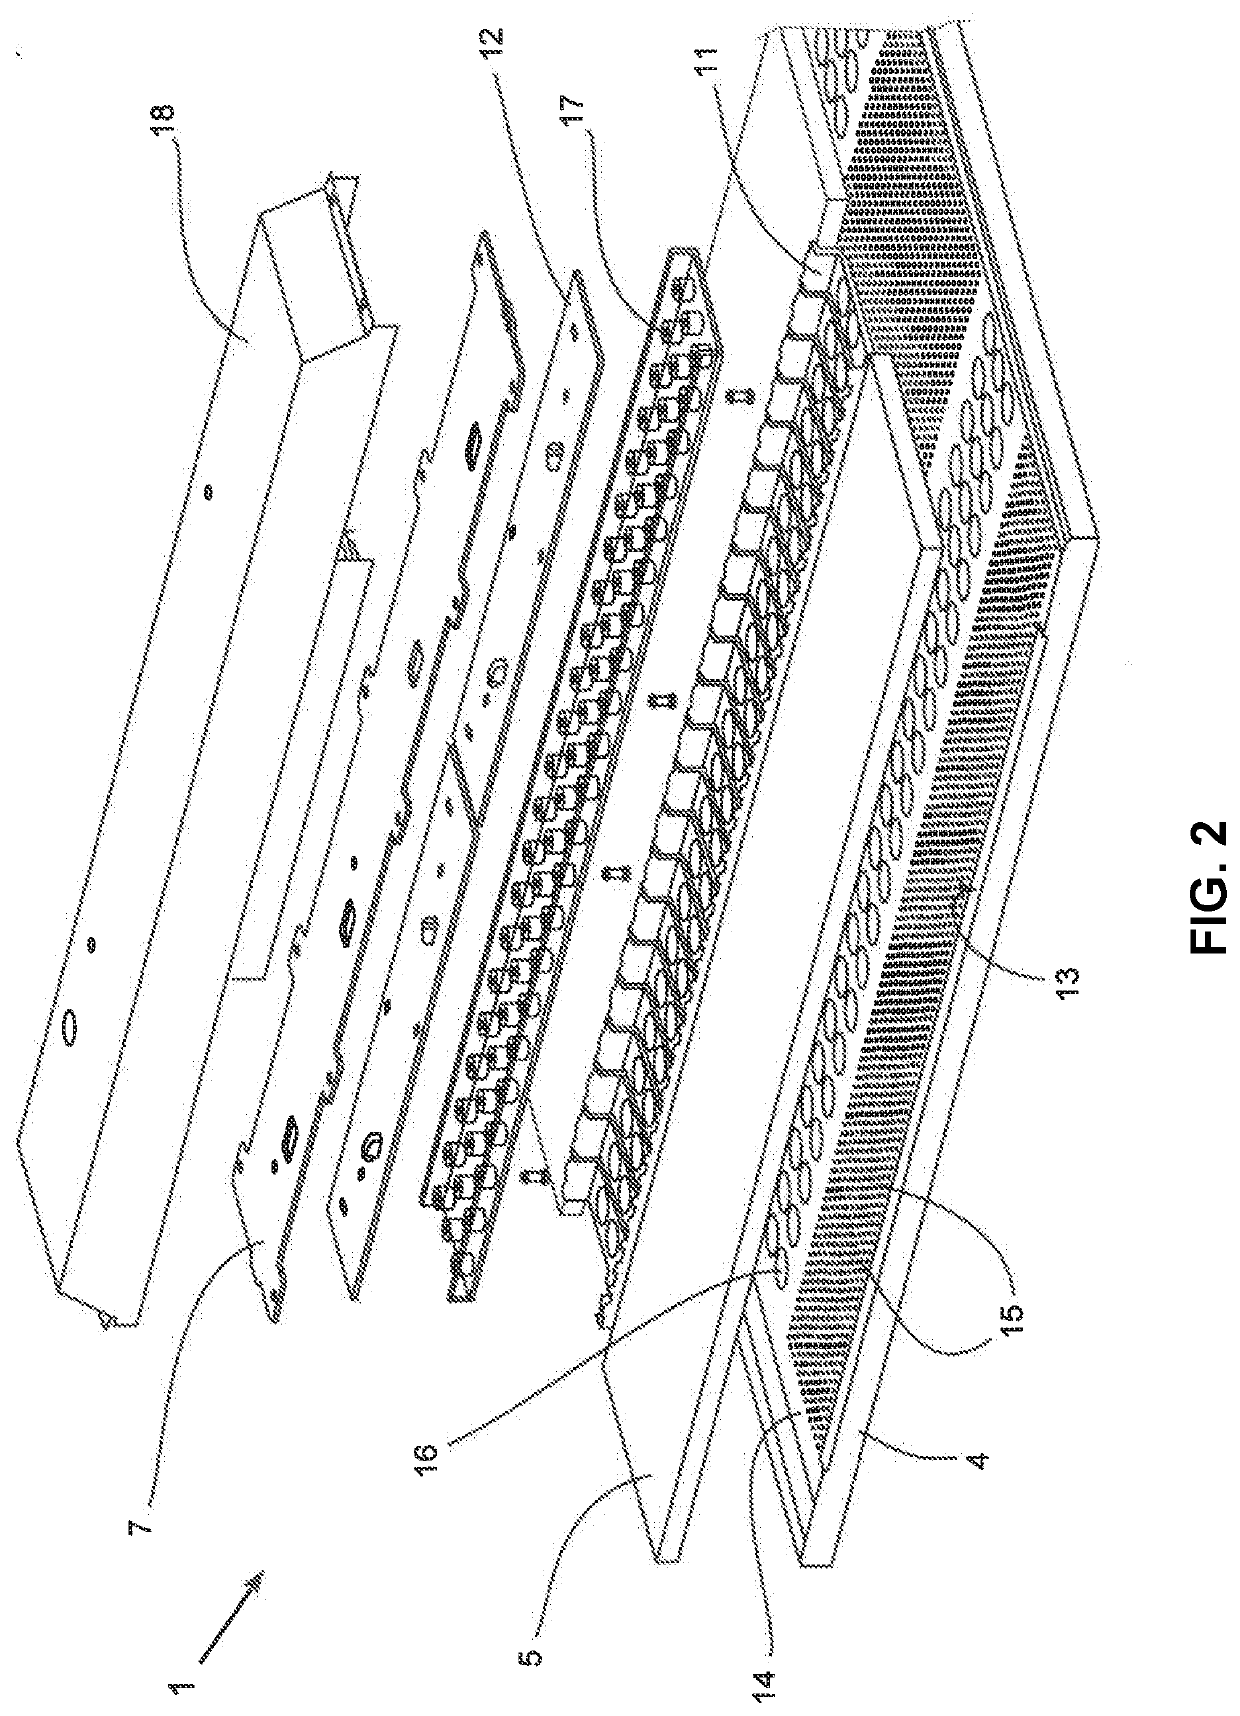 Sound-absorbing device